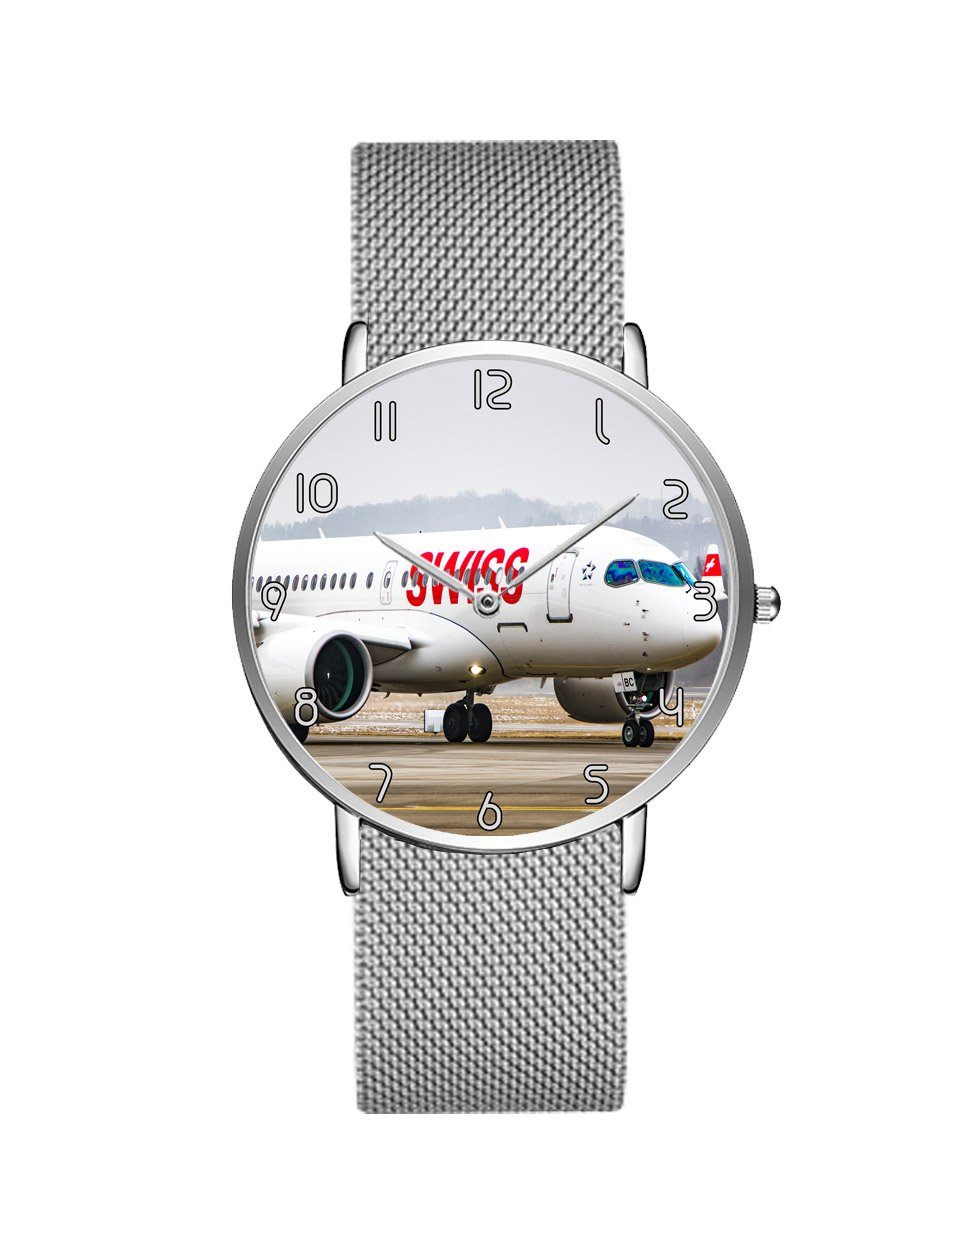 Taking Off Aircraft Printed Stainless Steel Strap Watches Aviation Shop Silver & Black Stainless Steel Strap 